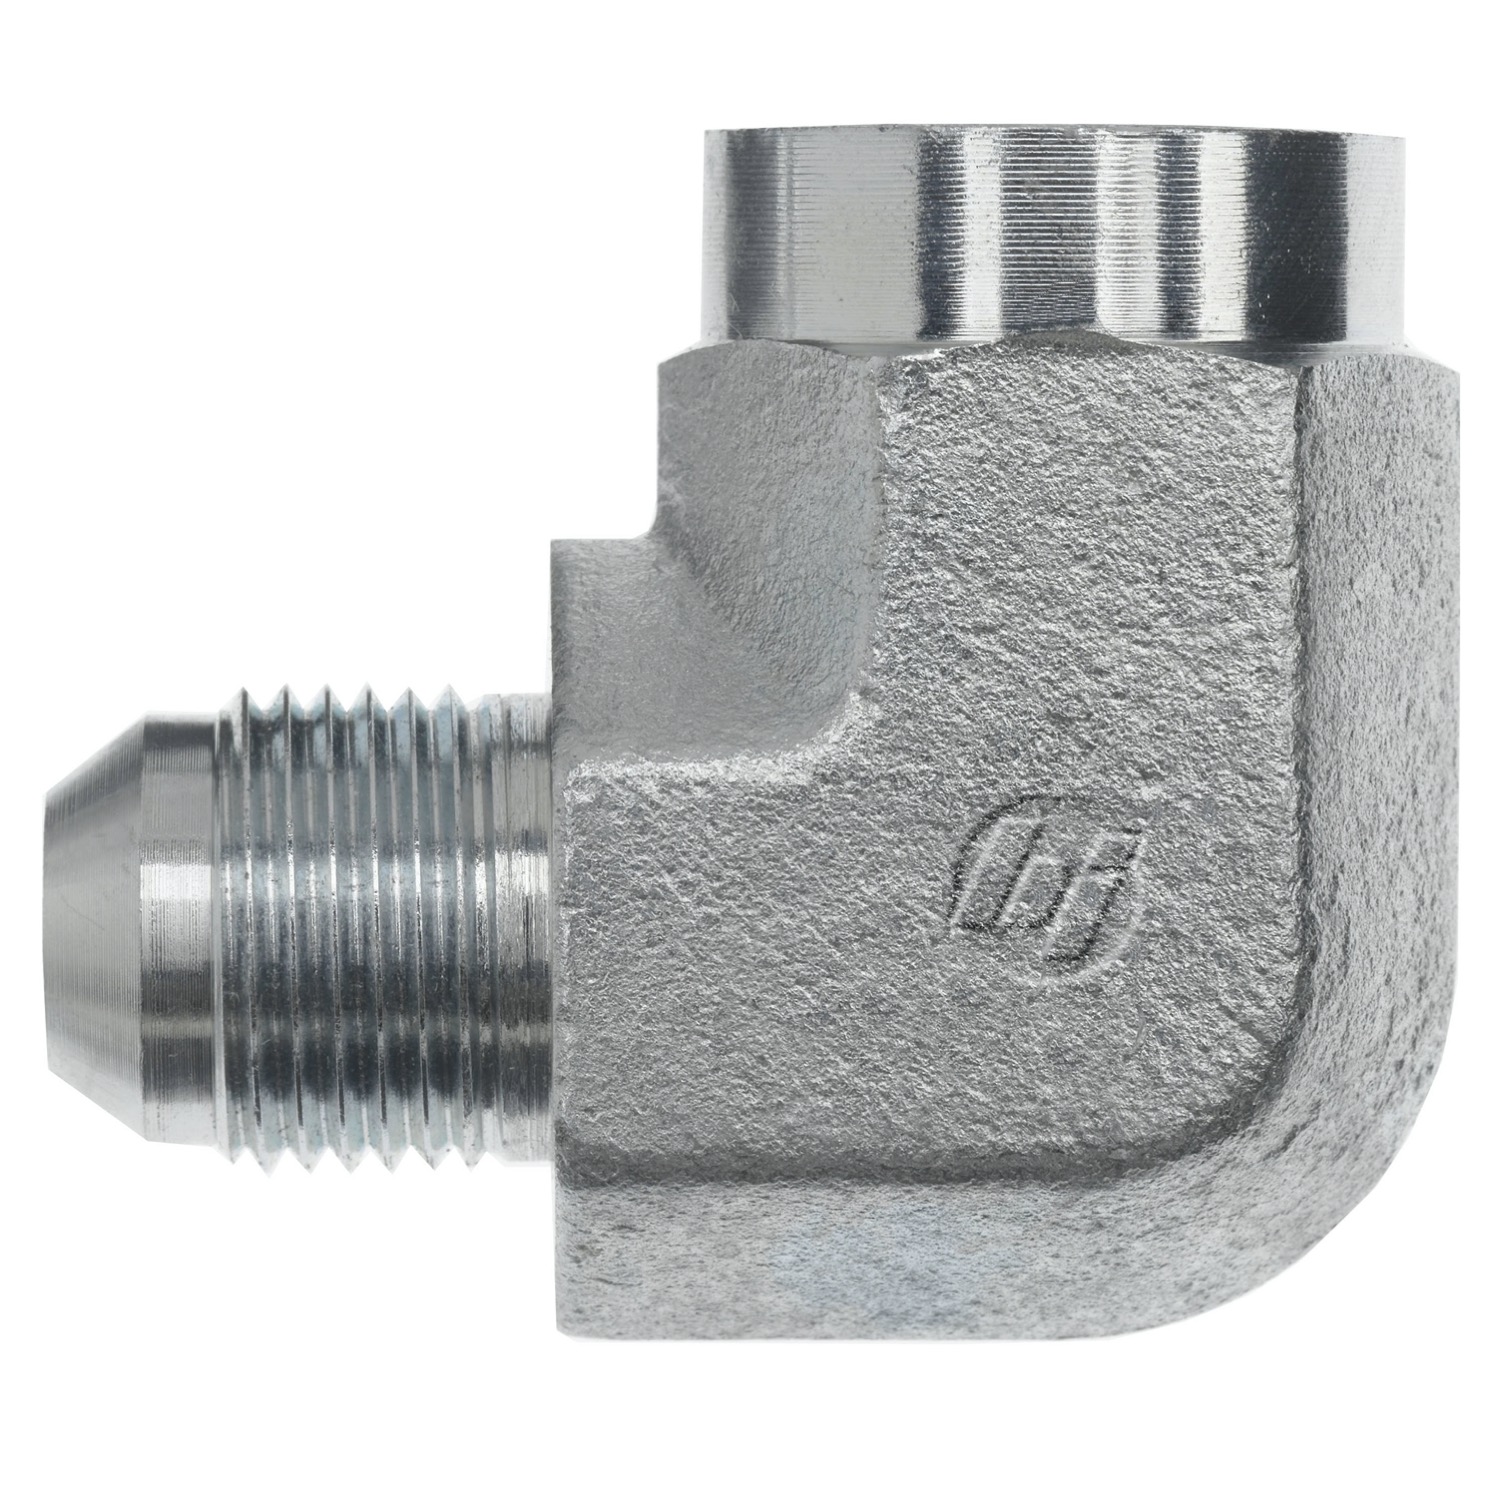 Hydraulic Hose Adapters - Elbow 90° Fitting, JIC 37° Flare to NPTF- 2502 Series 2502-10-08-FG